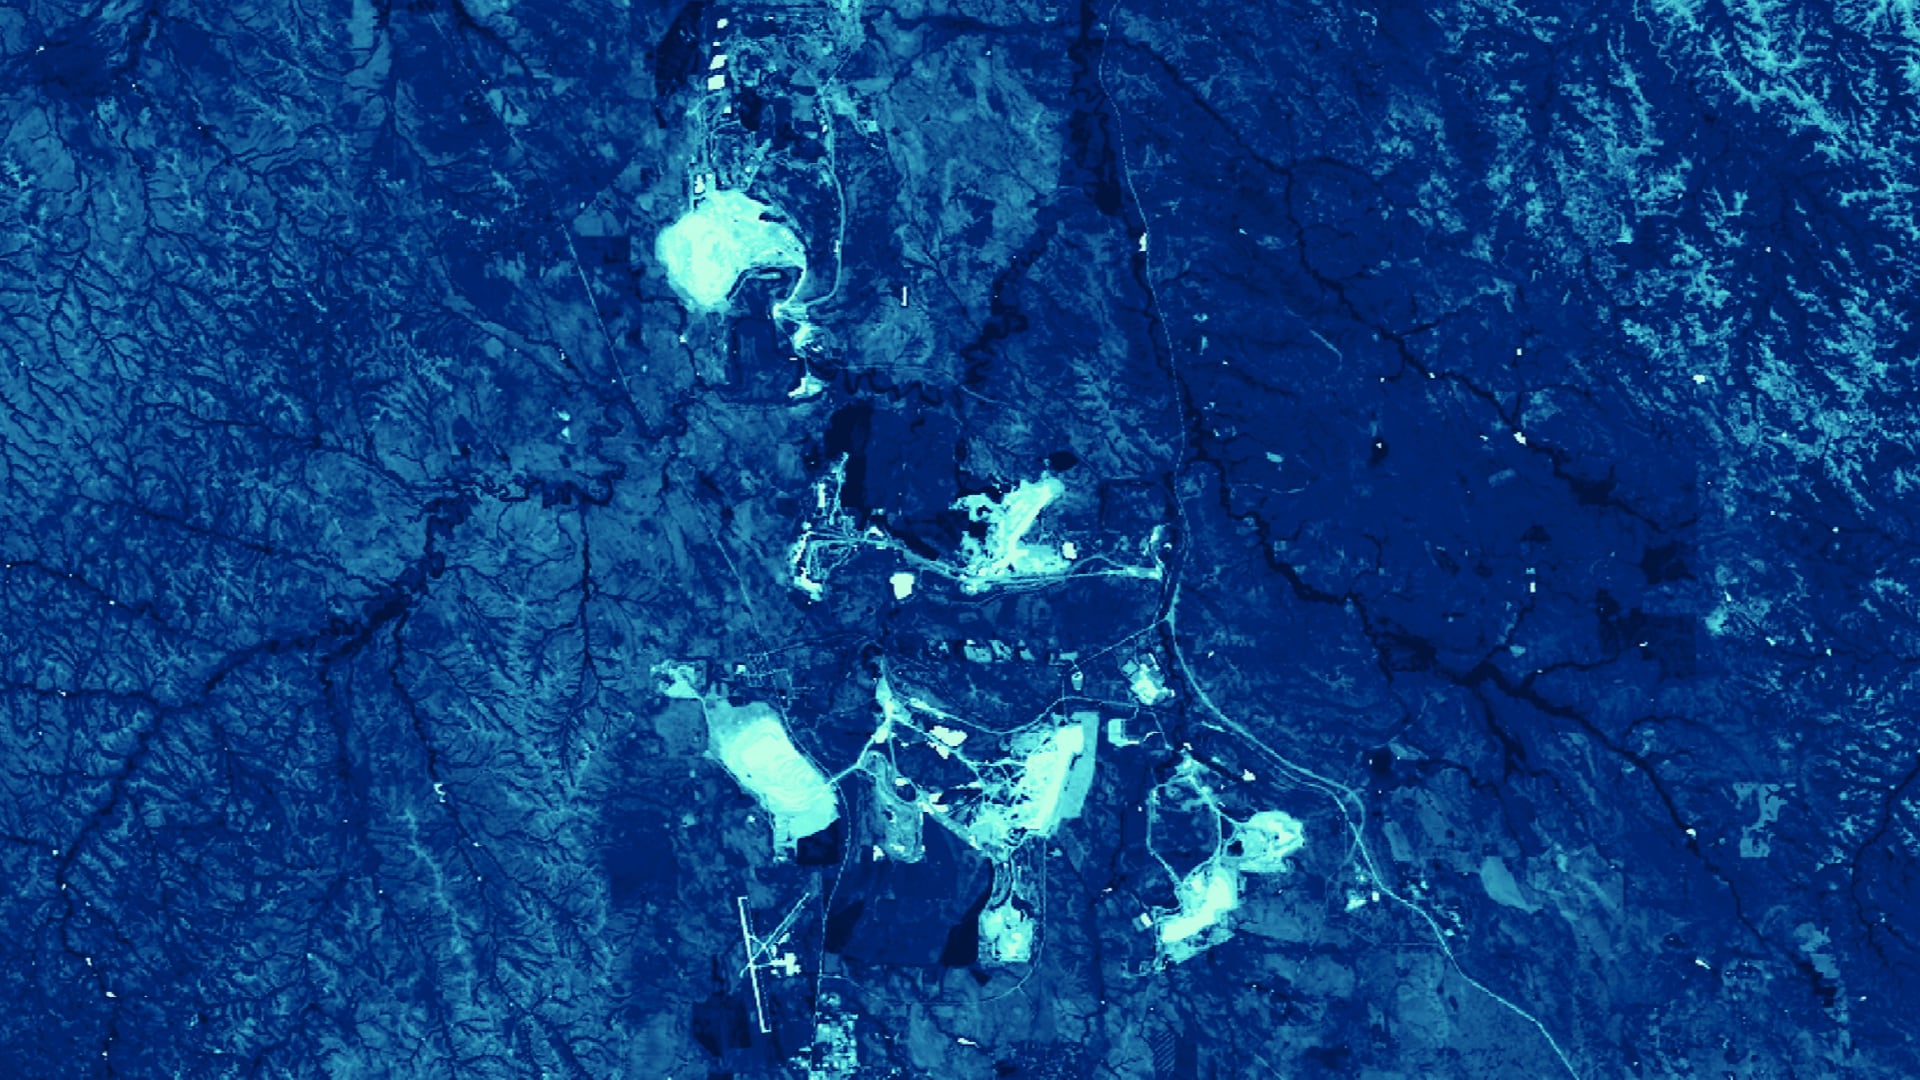 Tasseled cap angle transformation applied to 2018 Landsat 8 OLI imagery. Coal mines in the Powder River Basin of Wyoming are displayed. Lighter shades of blue indicate a higher ratio of barren land to vegetation and darker shades indicate a lower ratio of barren land to vegetation. End users can use this transformation as a proxy for identifying how barren, mined lands change over time.